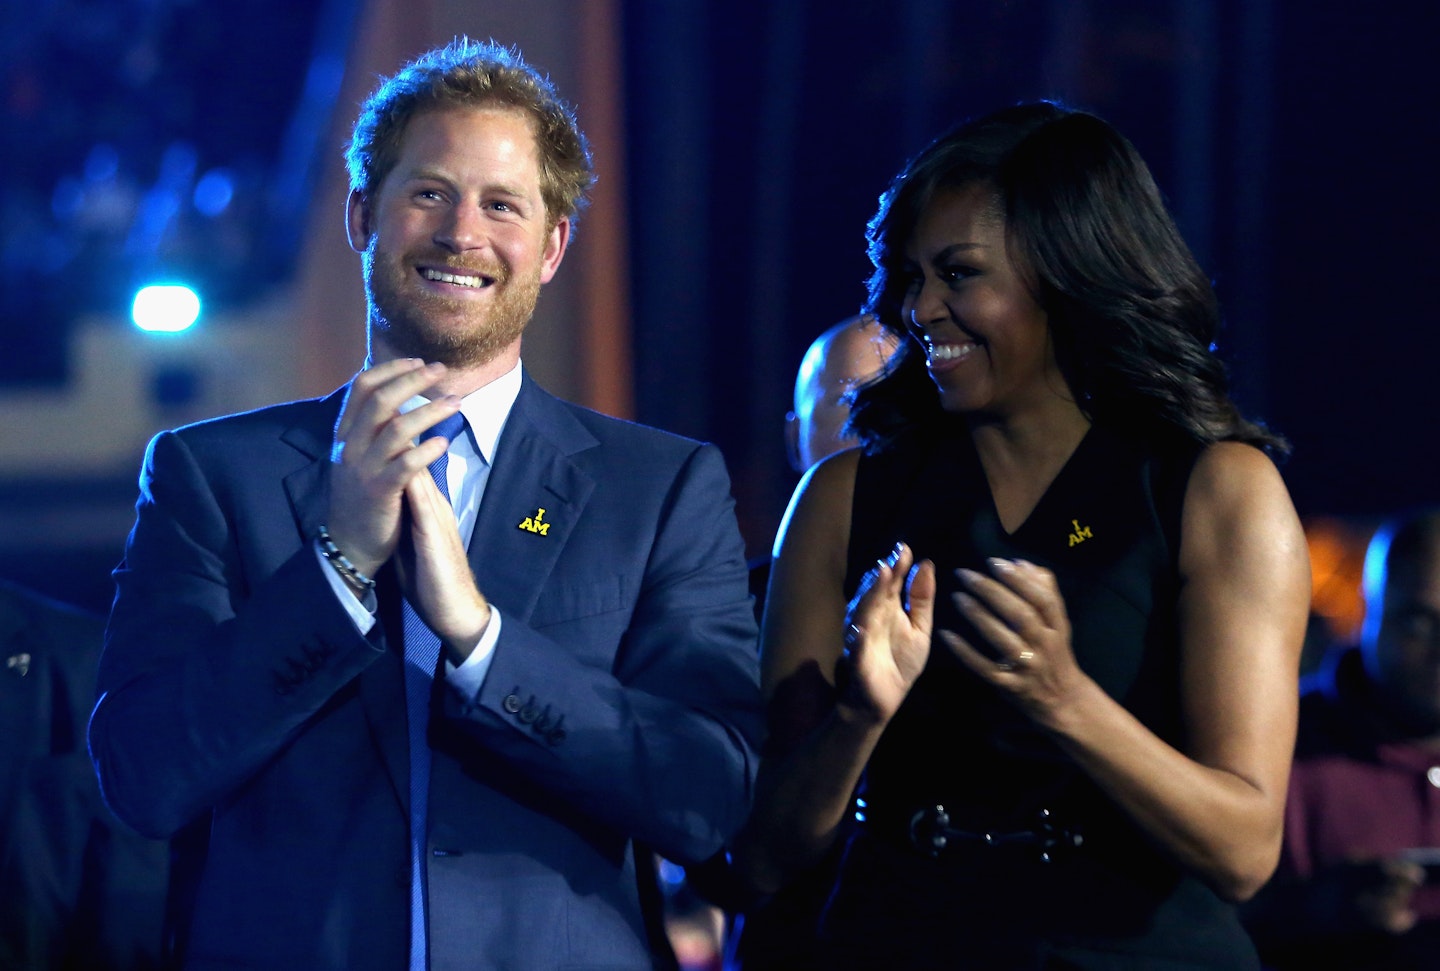 prince harry, michelle obama, invictus games, royal family